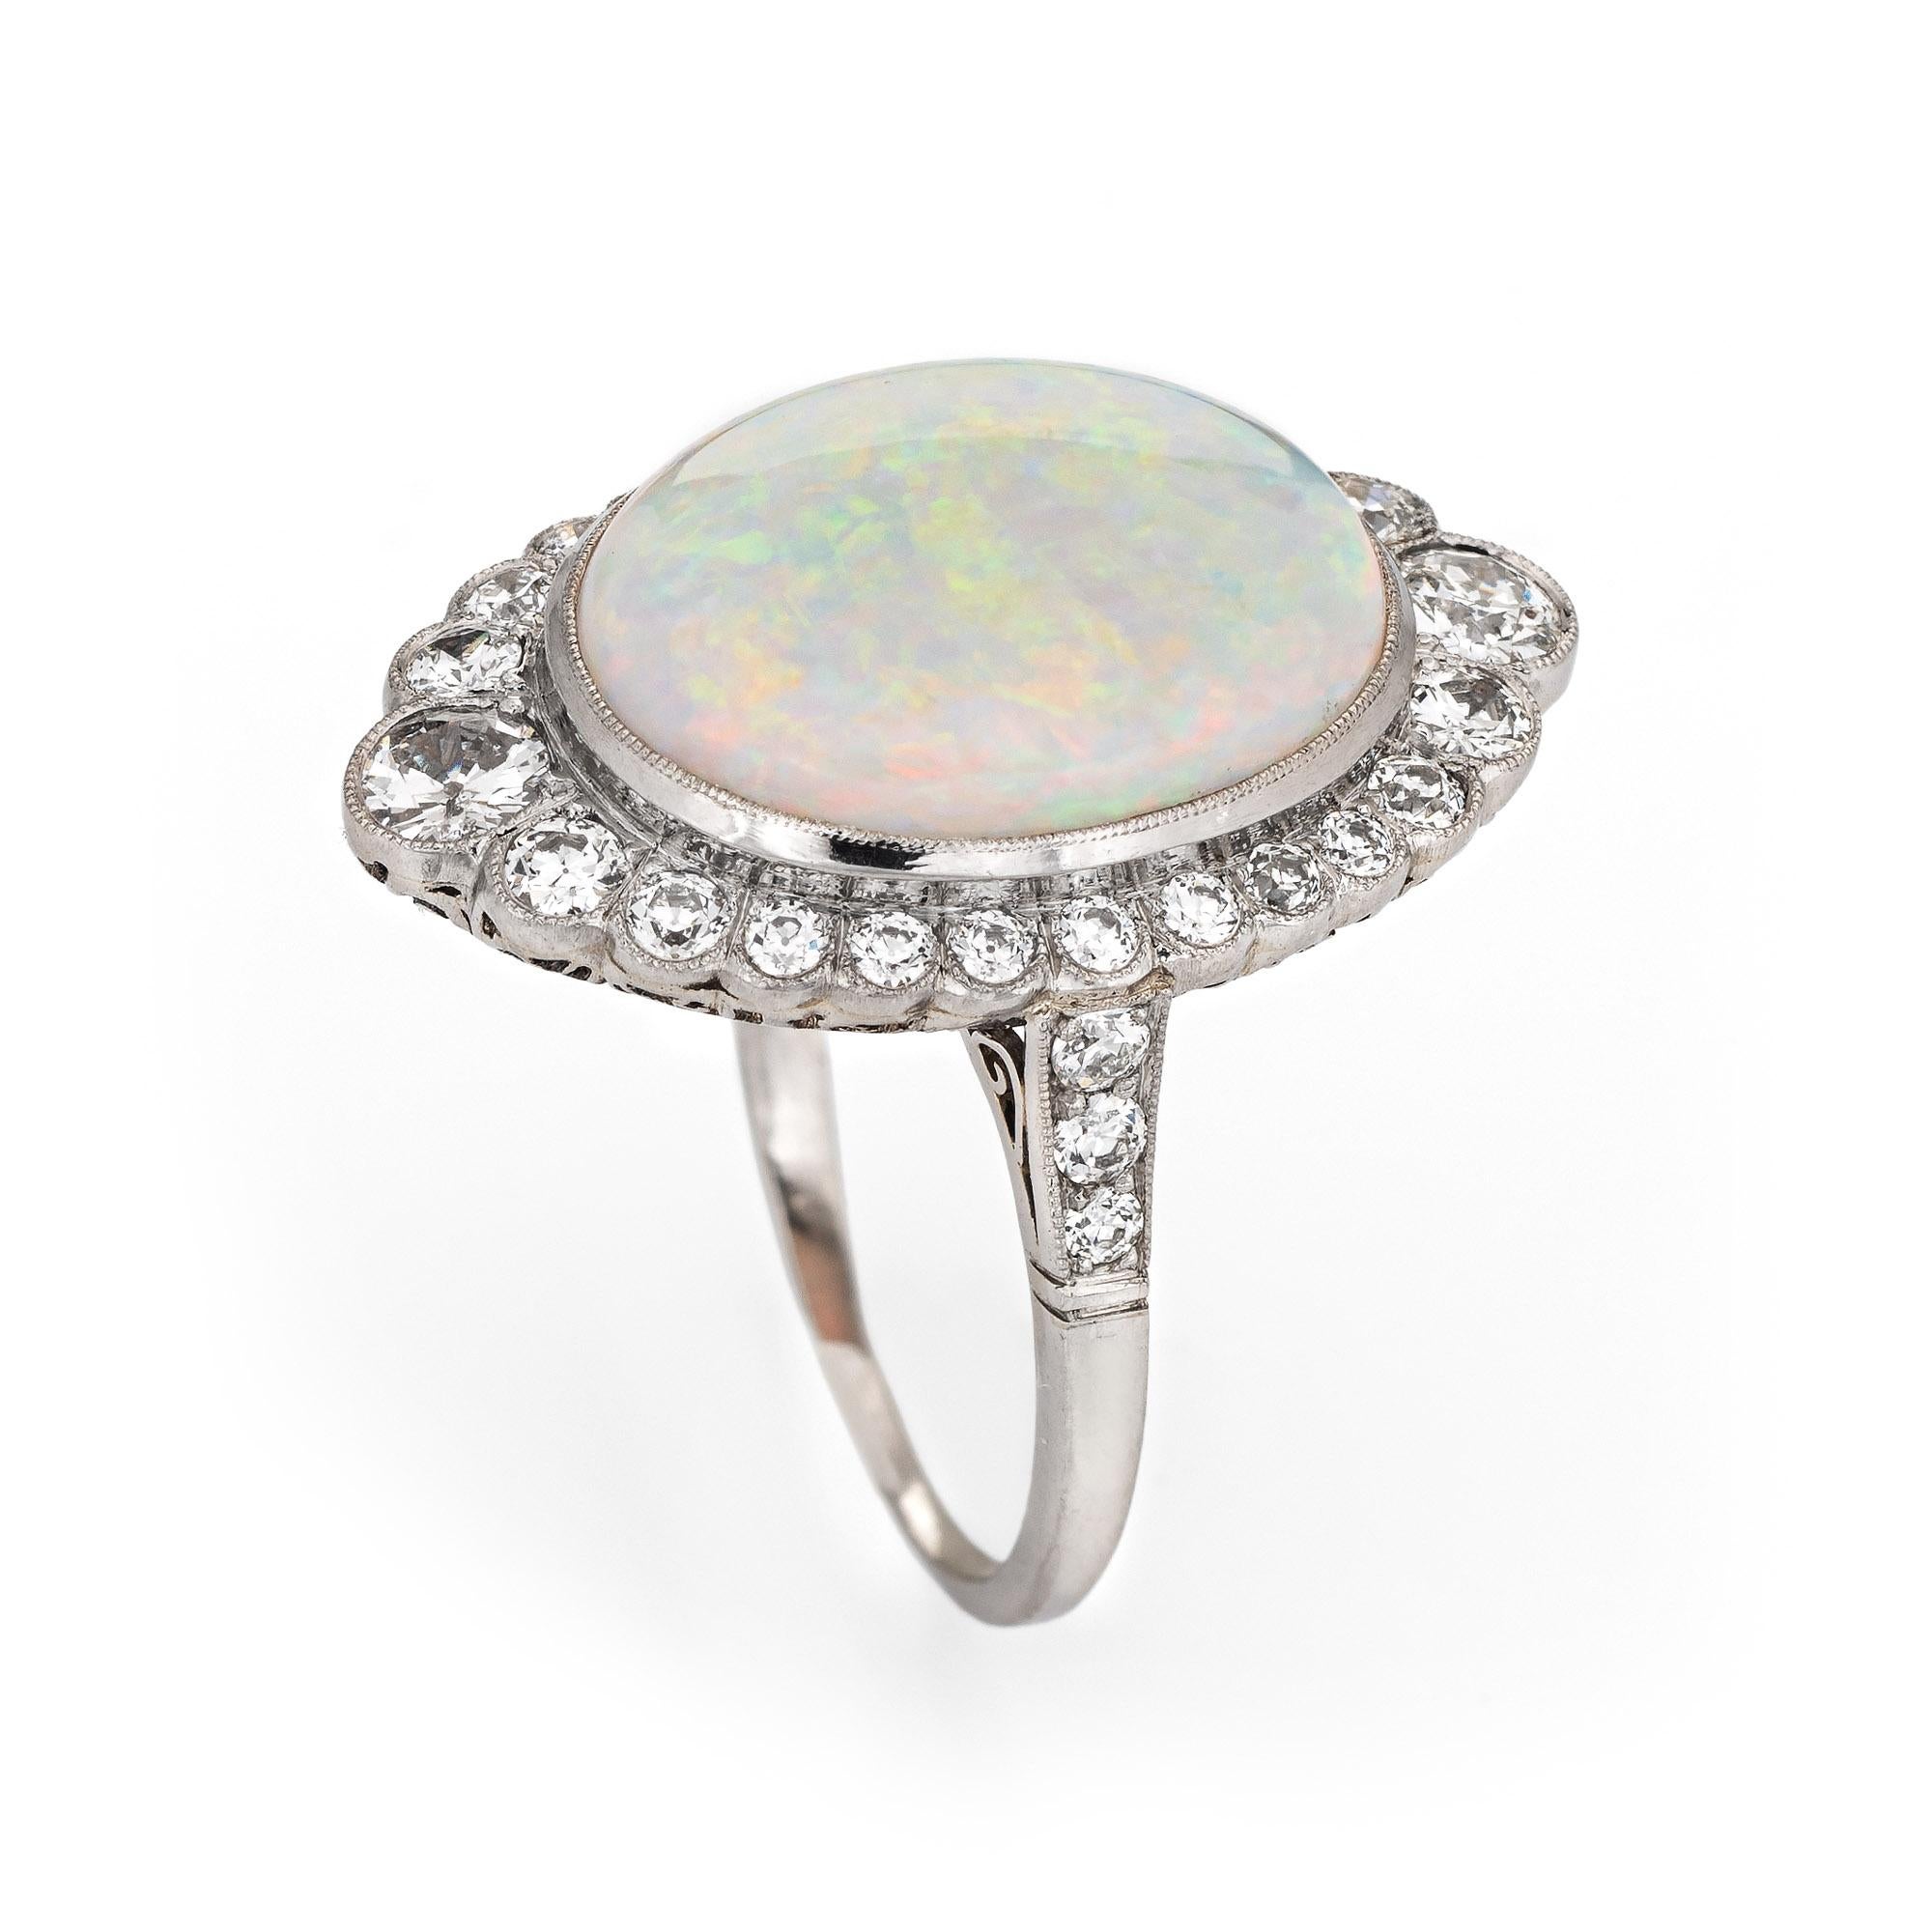 Stylish natural opal & diamond ring crafted in platinum. 

Natural opal measures 17mm x 13mm (estimated at 5.67 carats). The diamonds total an estimated 1 carat (estimated at H-I color and VS2-SI2 clarity). The opal is in excellent condition and